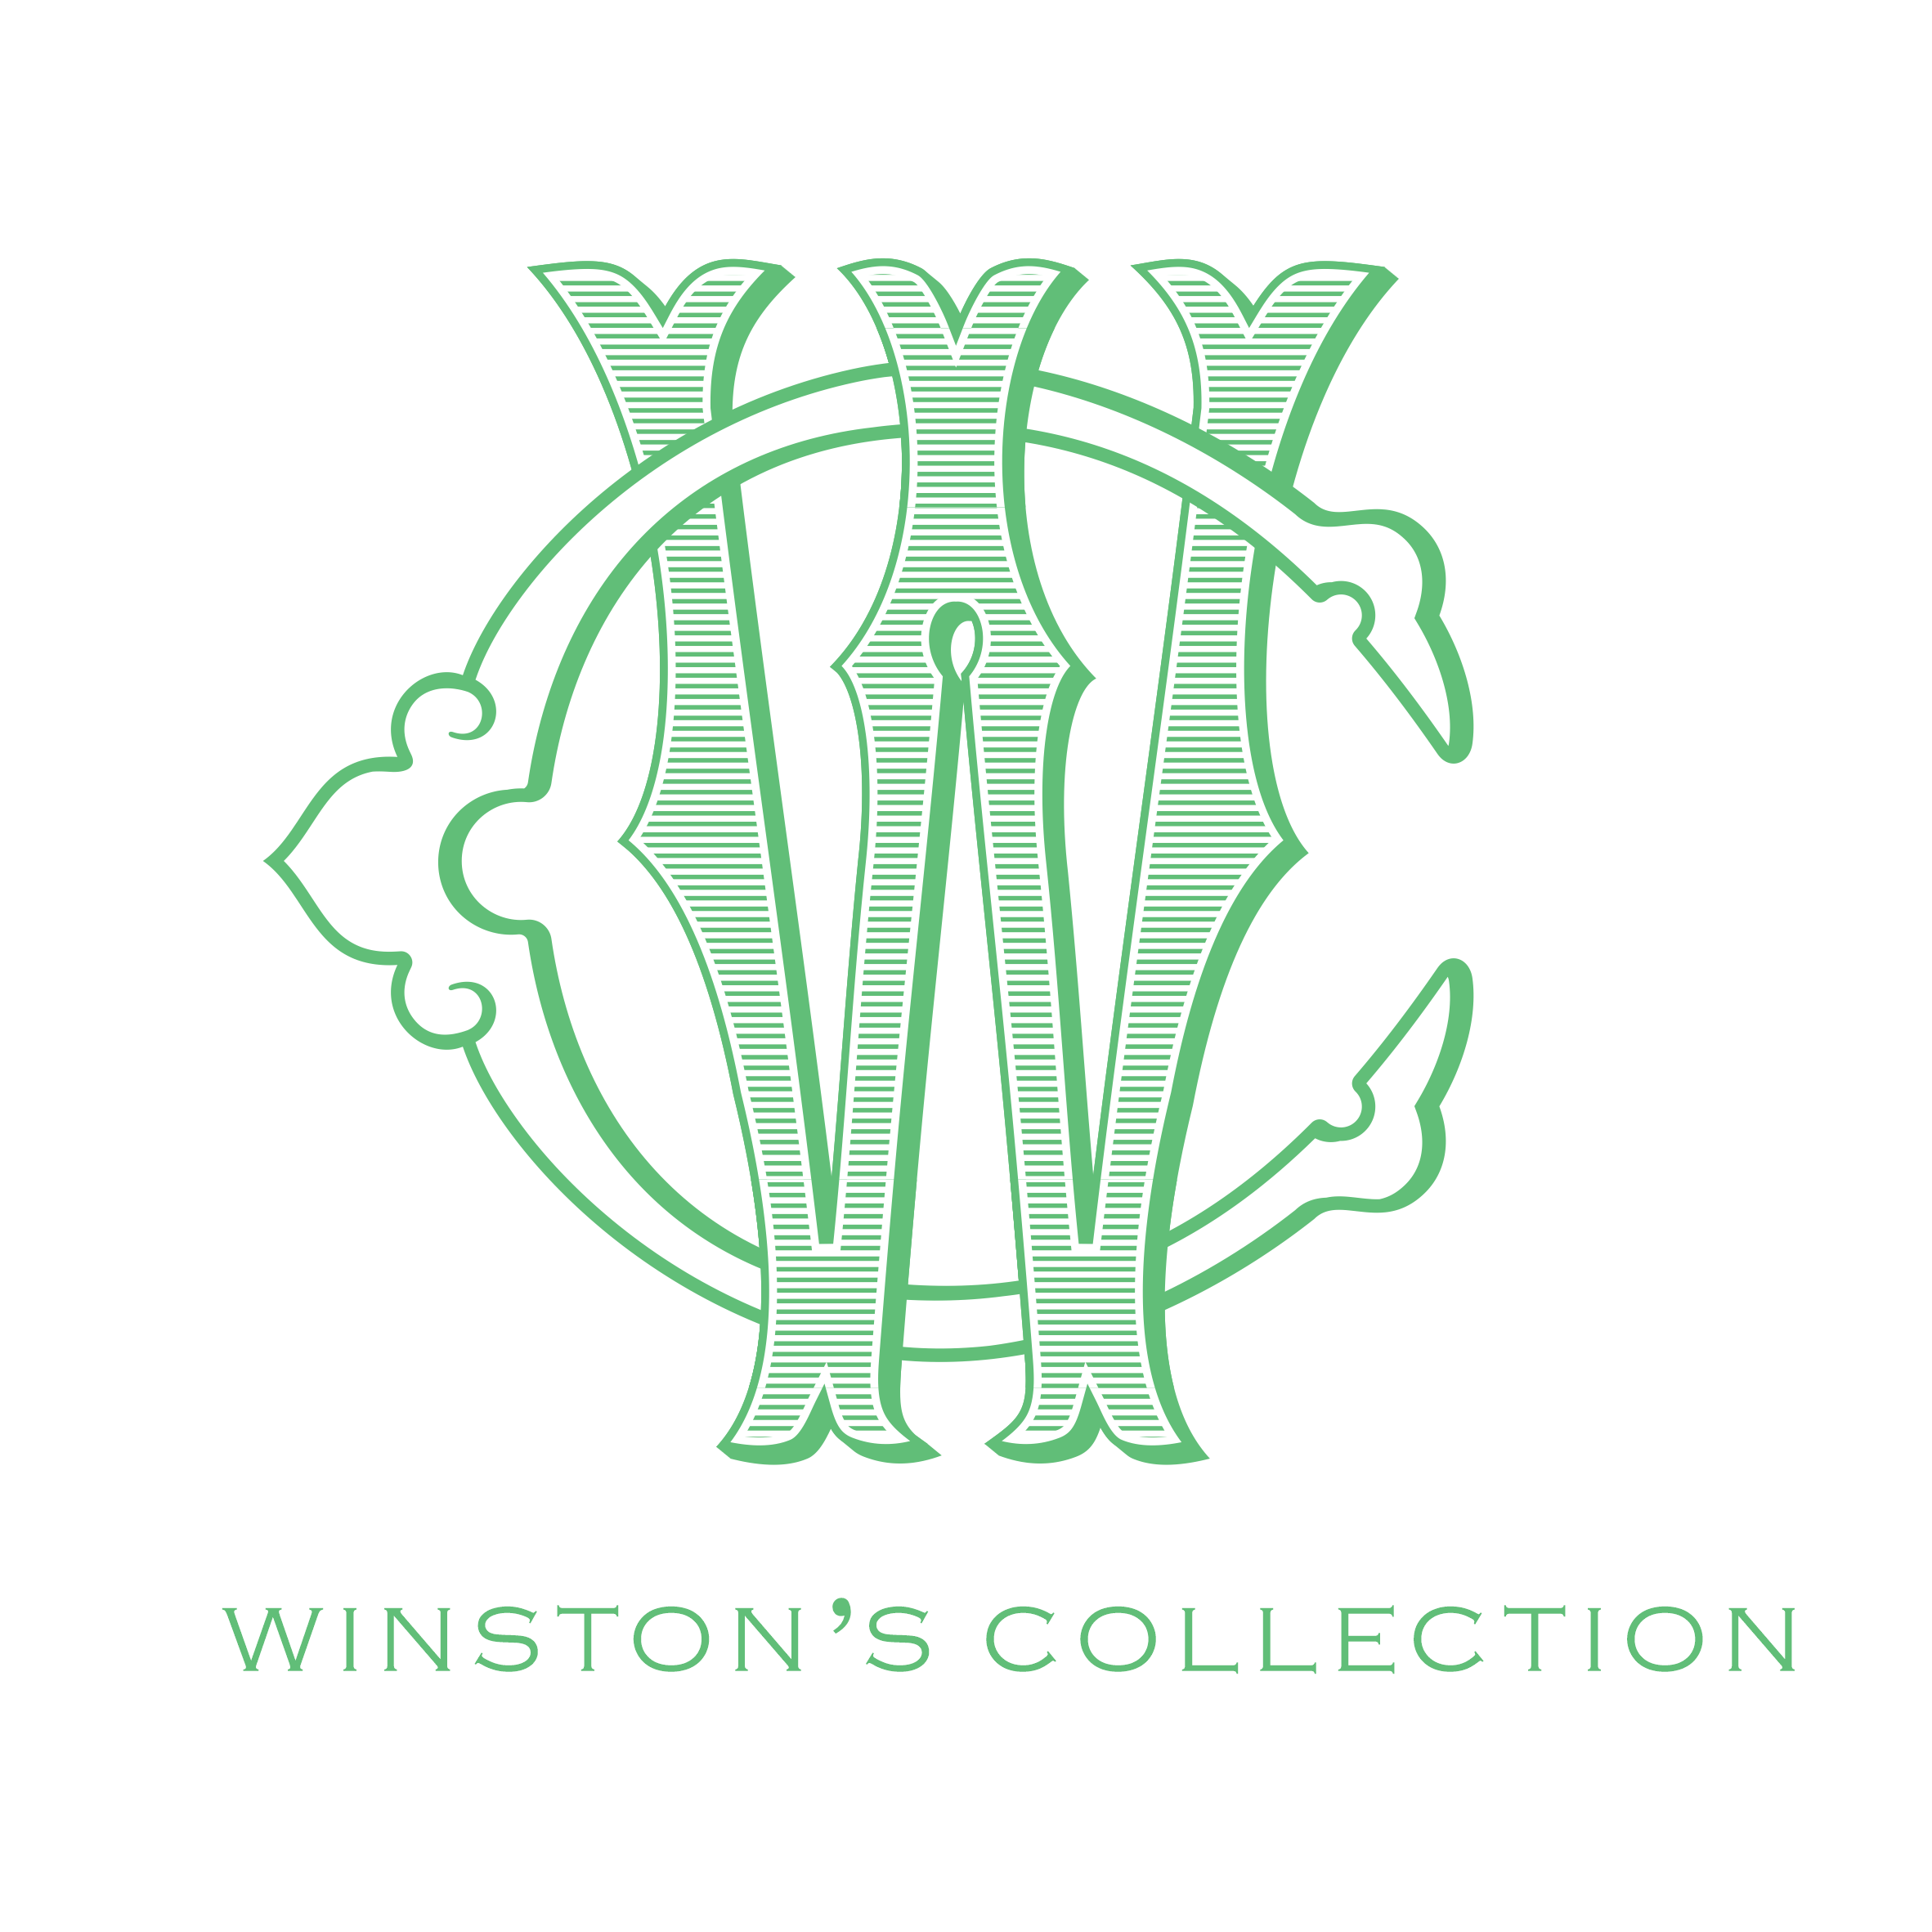 Winston's Collection Logo. Custom vintage finds located in Winston Salem, NC shipping across the United States.